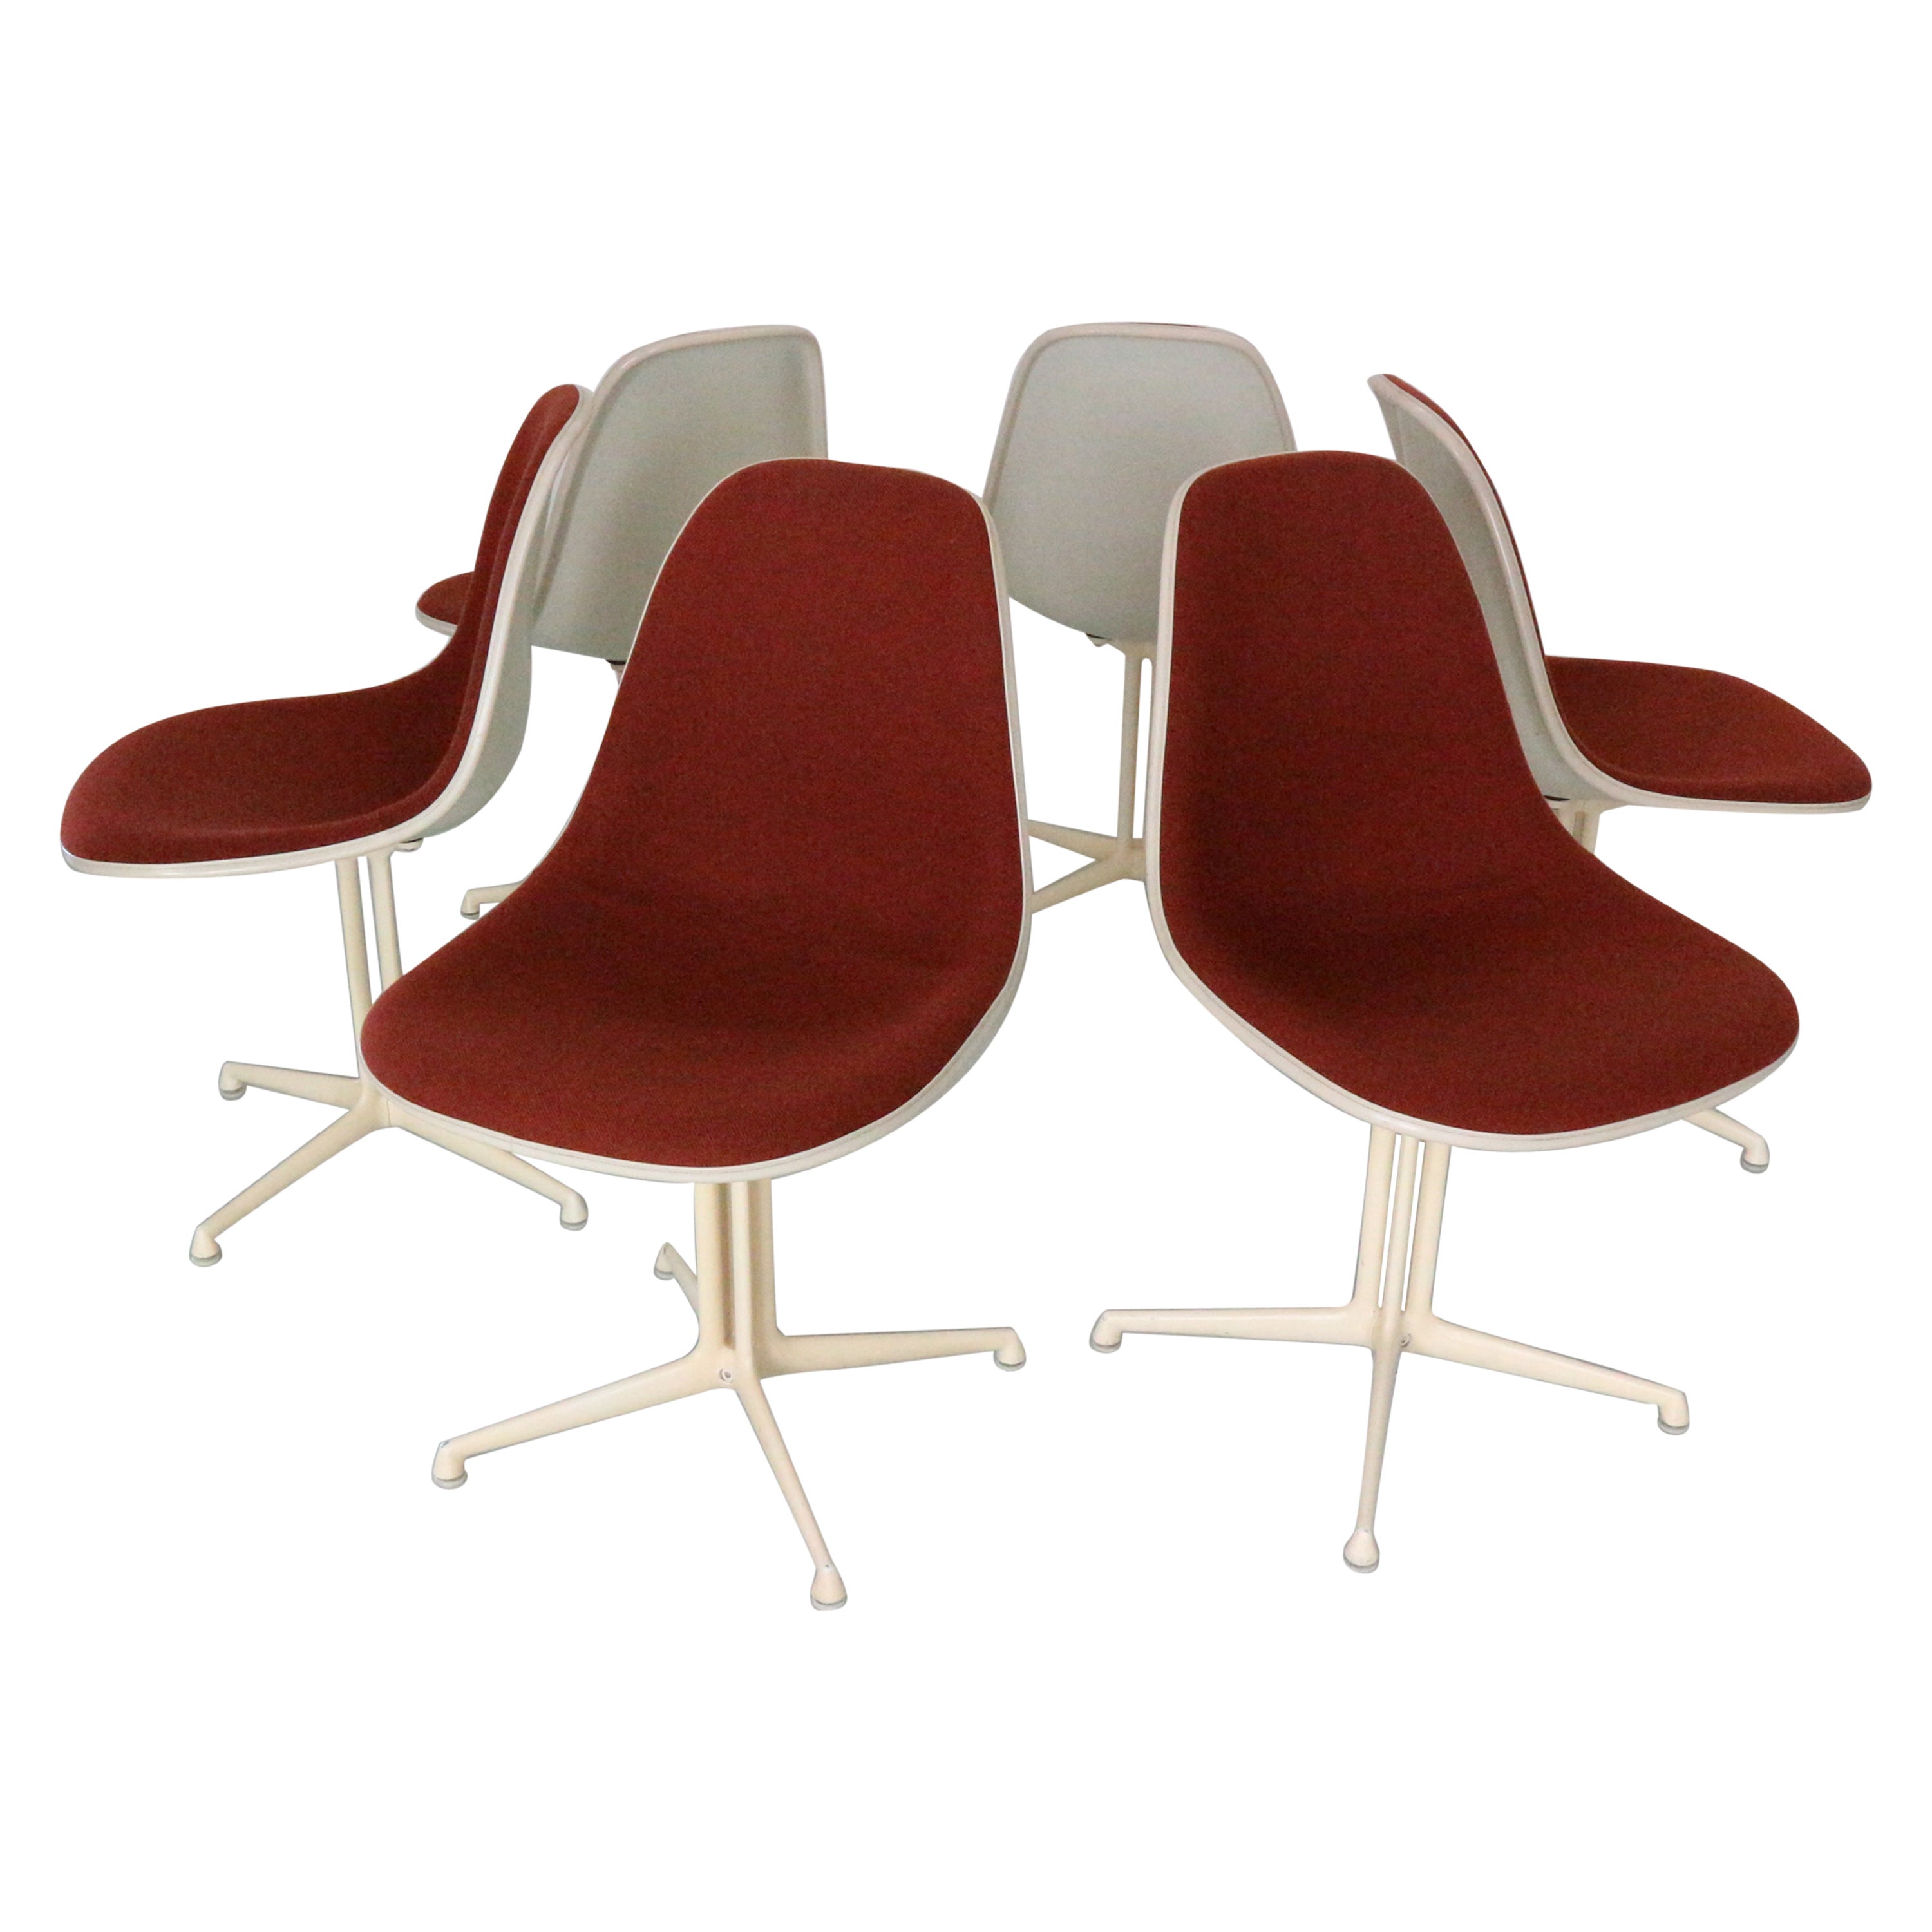 Charles & Ray Eames Set of 6 "La Fonda" Chairs for Herman Miller, 1960